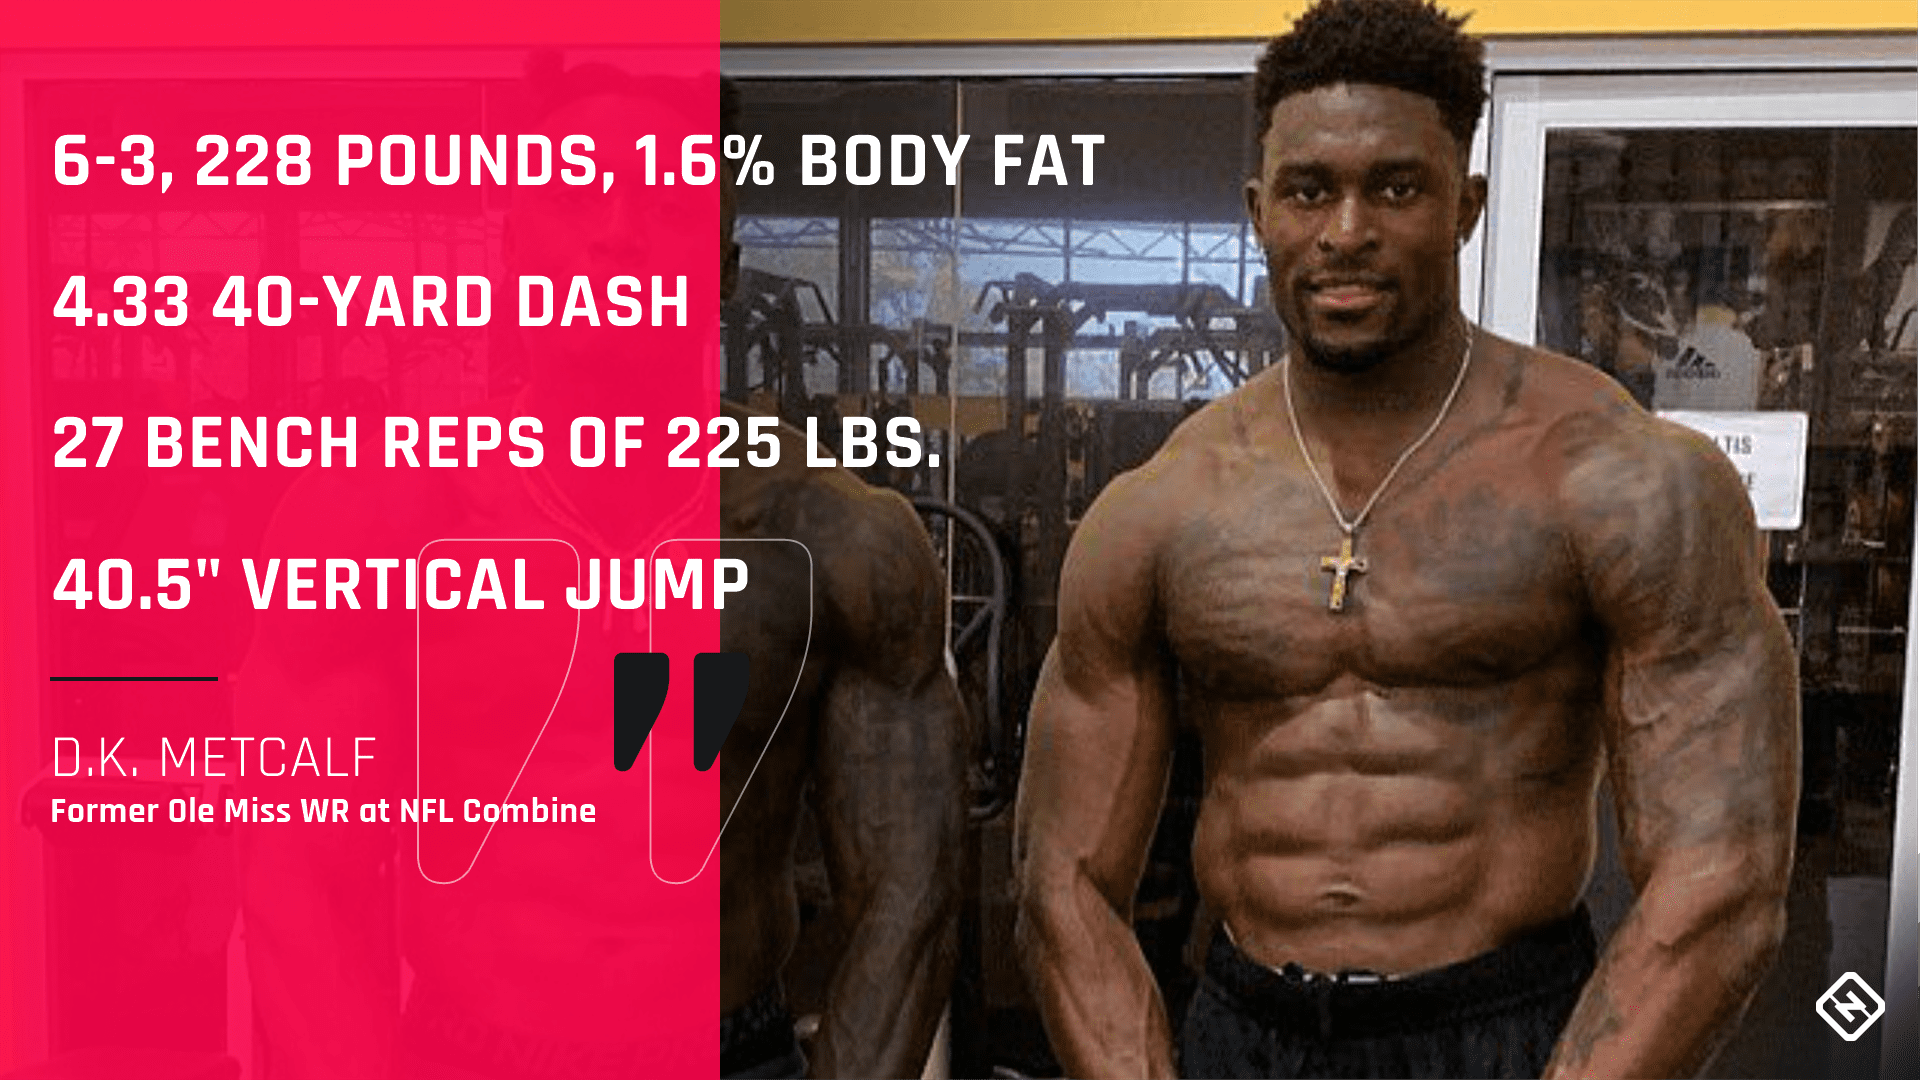 DK Metcalf confirms the NFL gave him a drug test after his insane vertical jump video